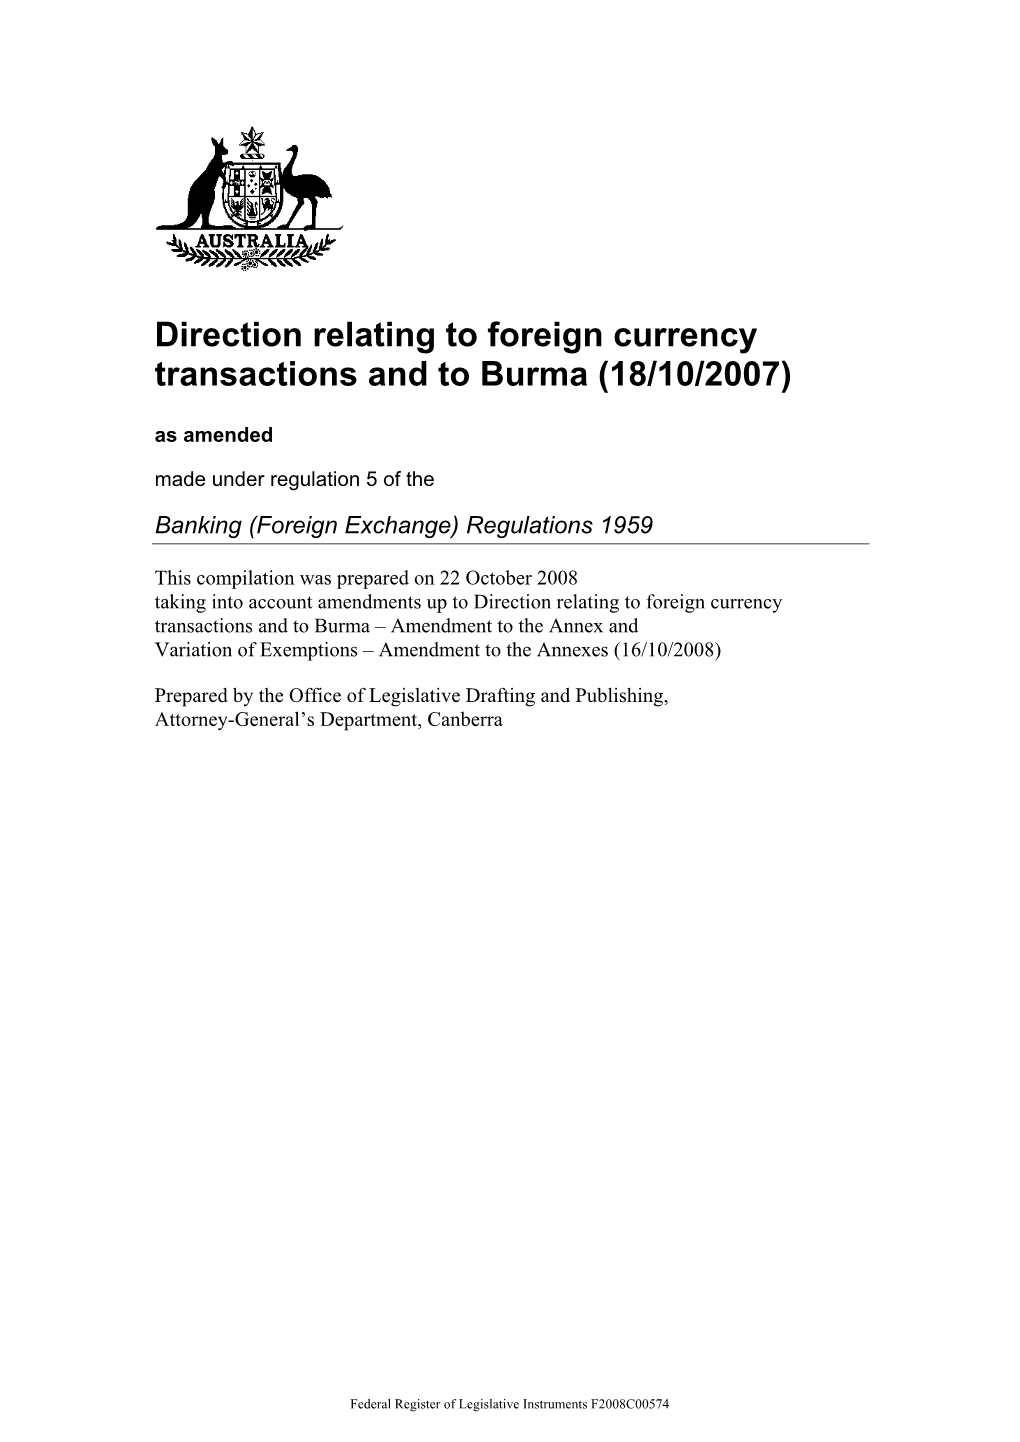 Direction Relating to Foreign Currency Transactions and to Burma (18/10/2007) As Amended Made Under Regulation 5 of The